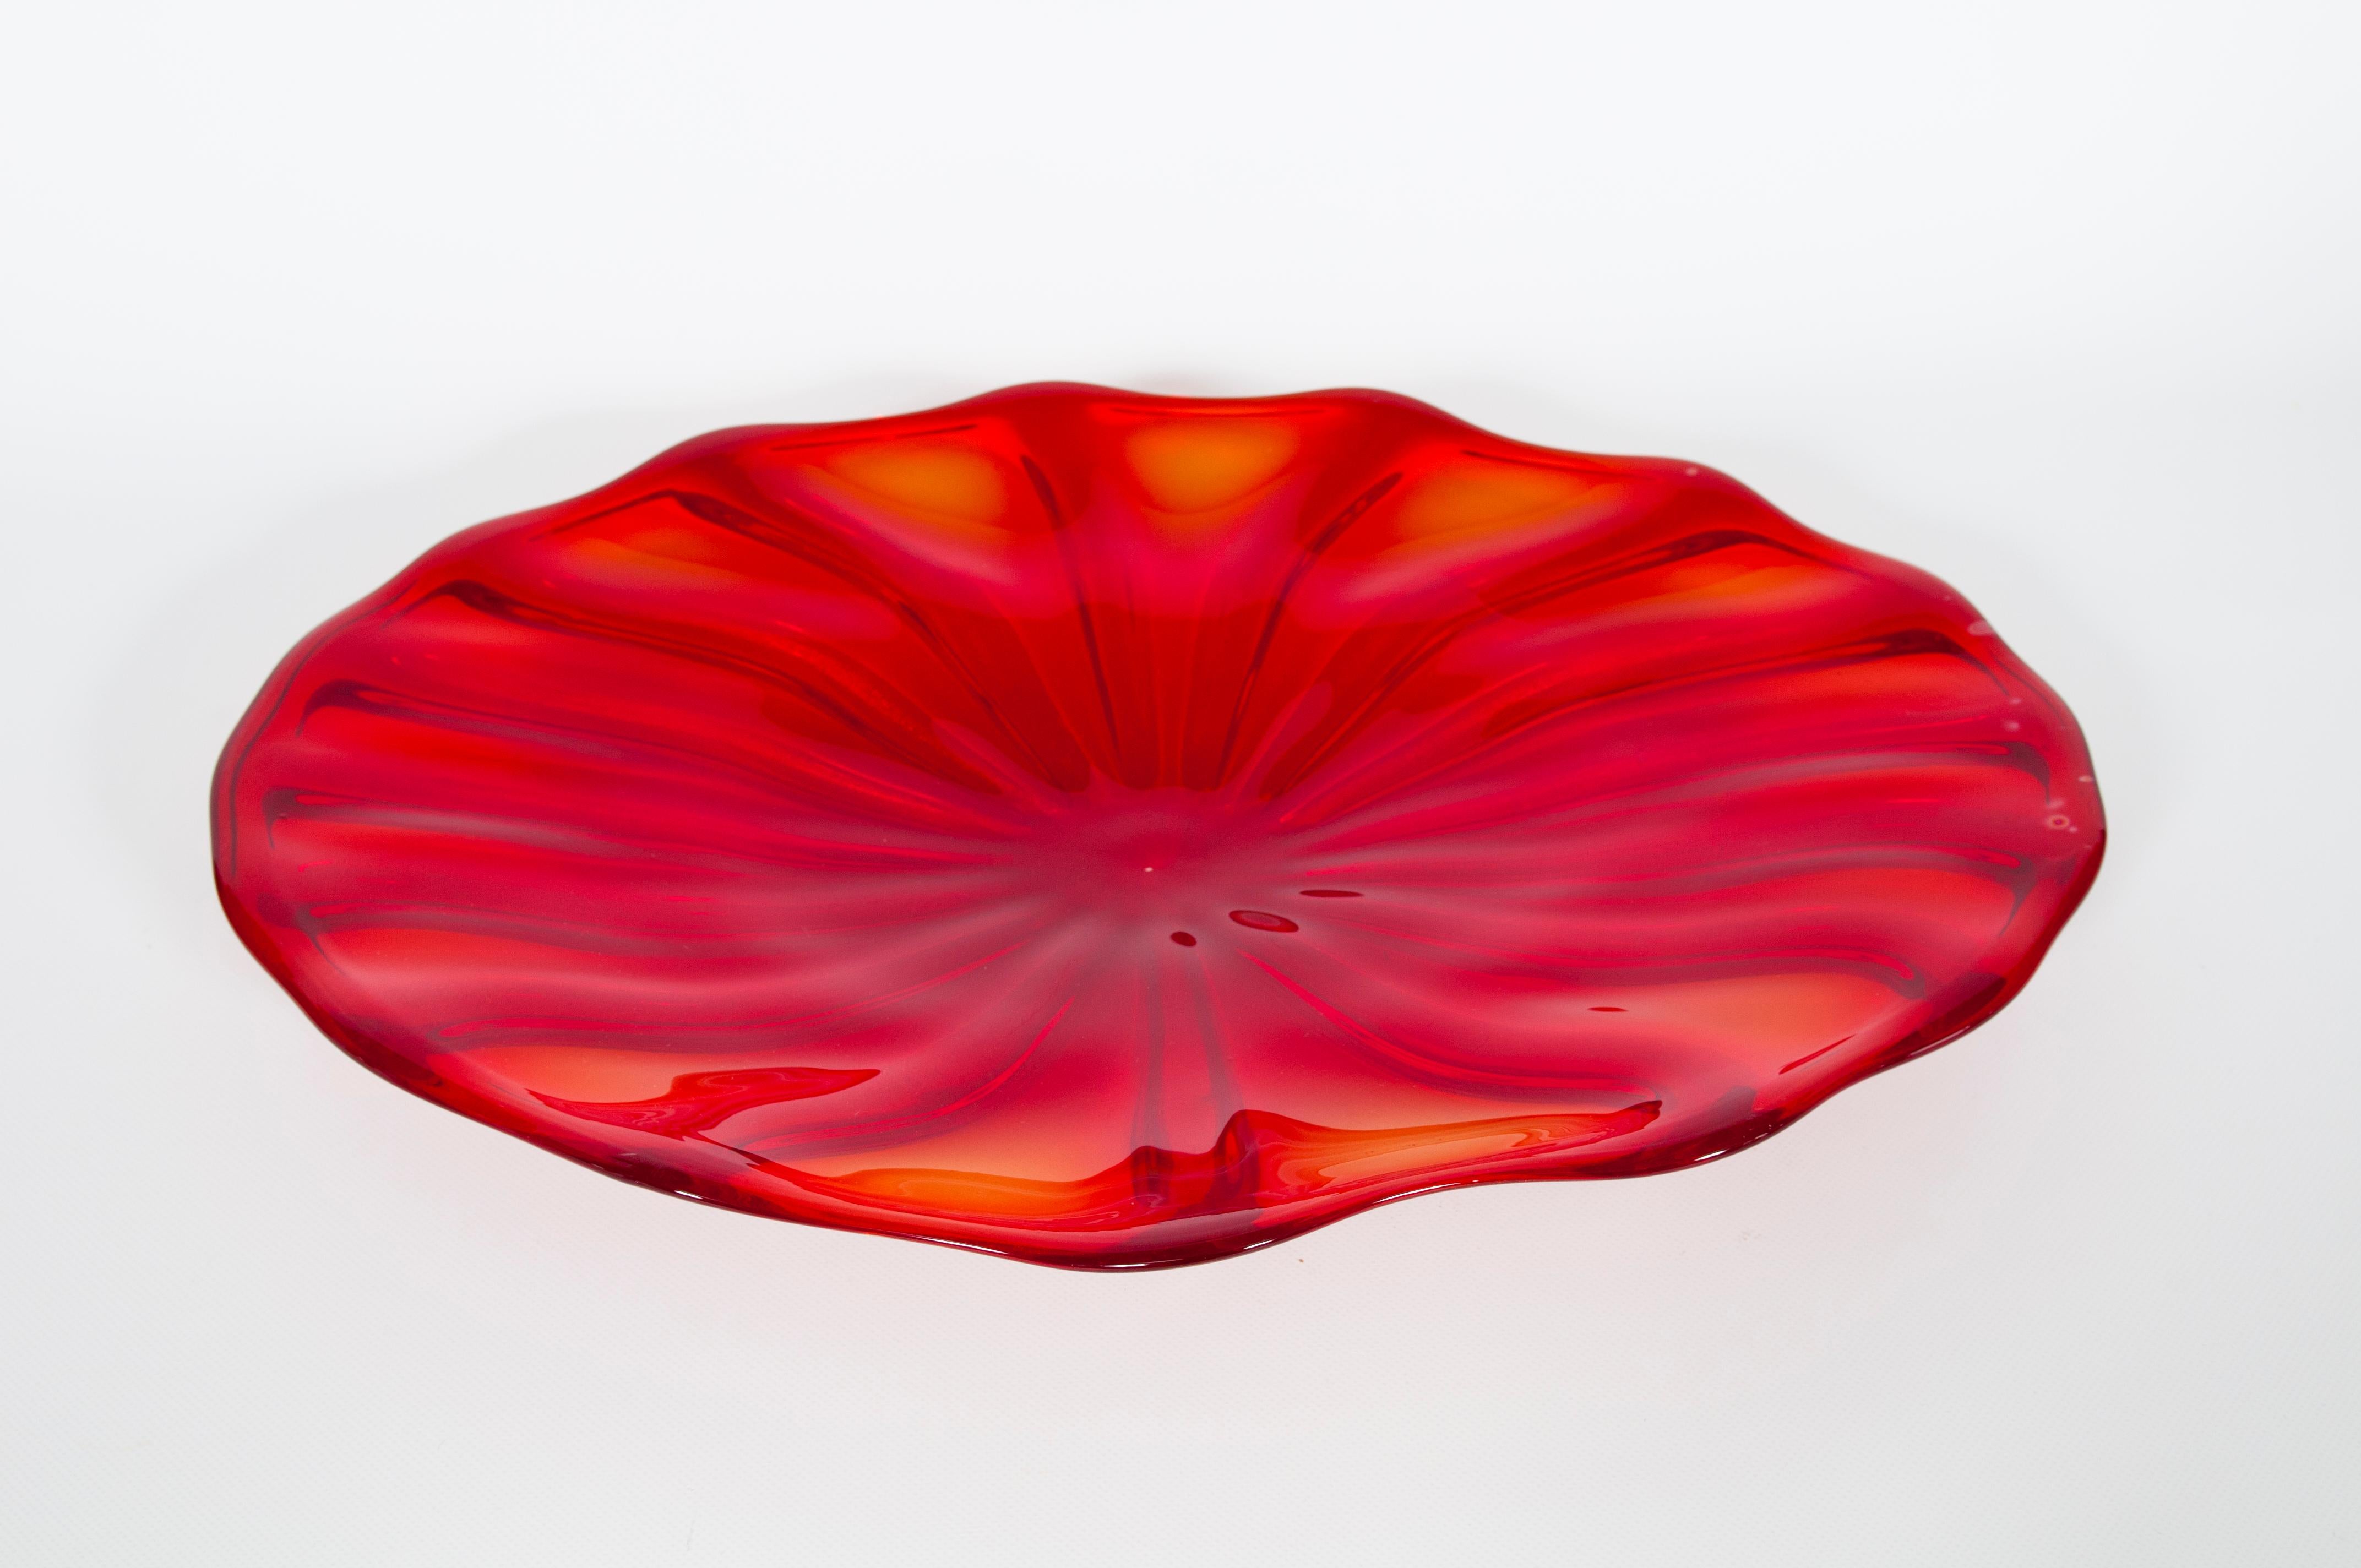 Hand-Crafted Italian Venetian Red Murano Glass Centerpiece with Submerged Gold, 2000s For Sale